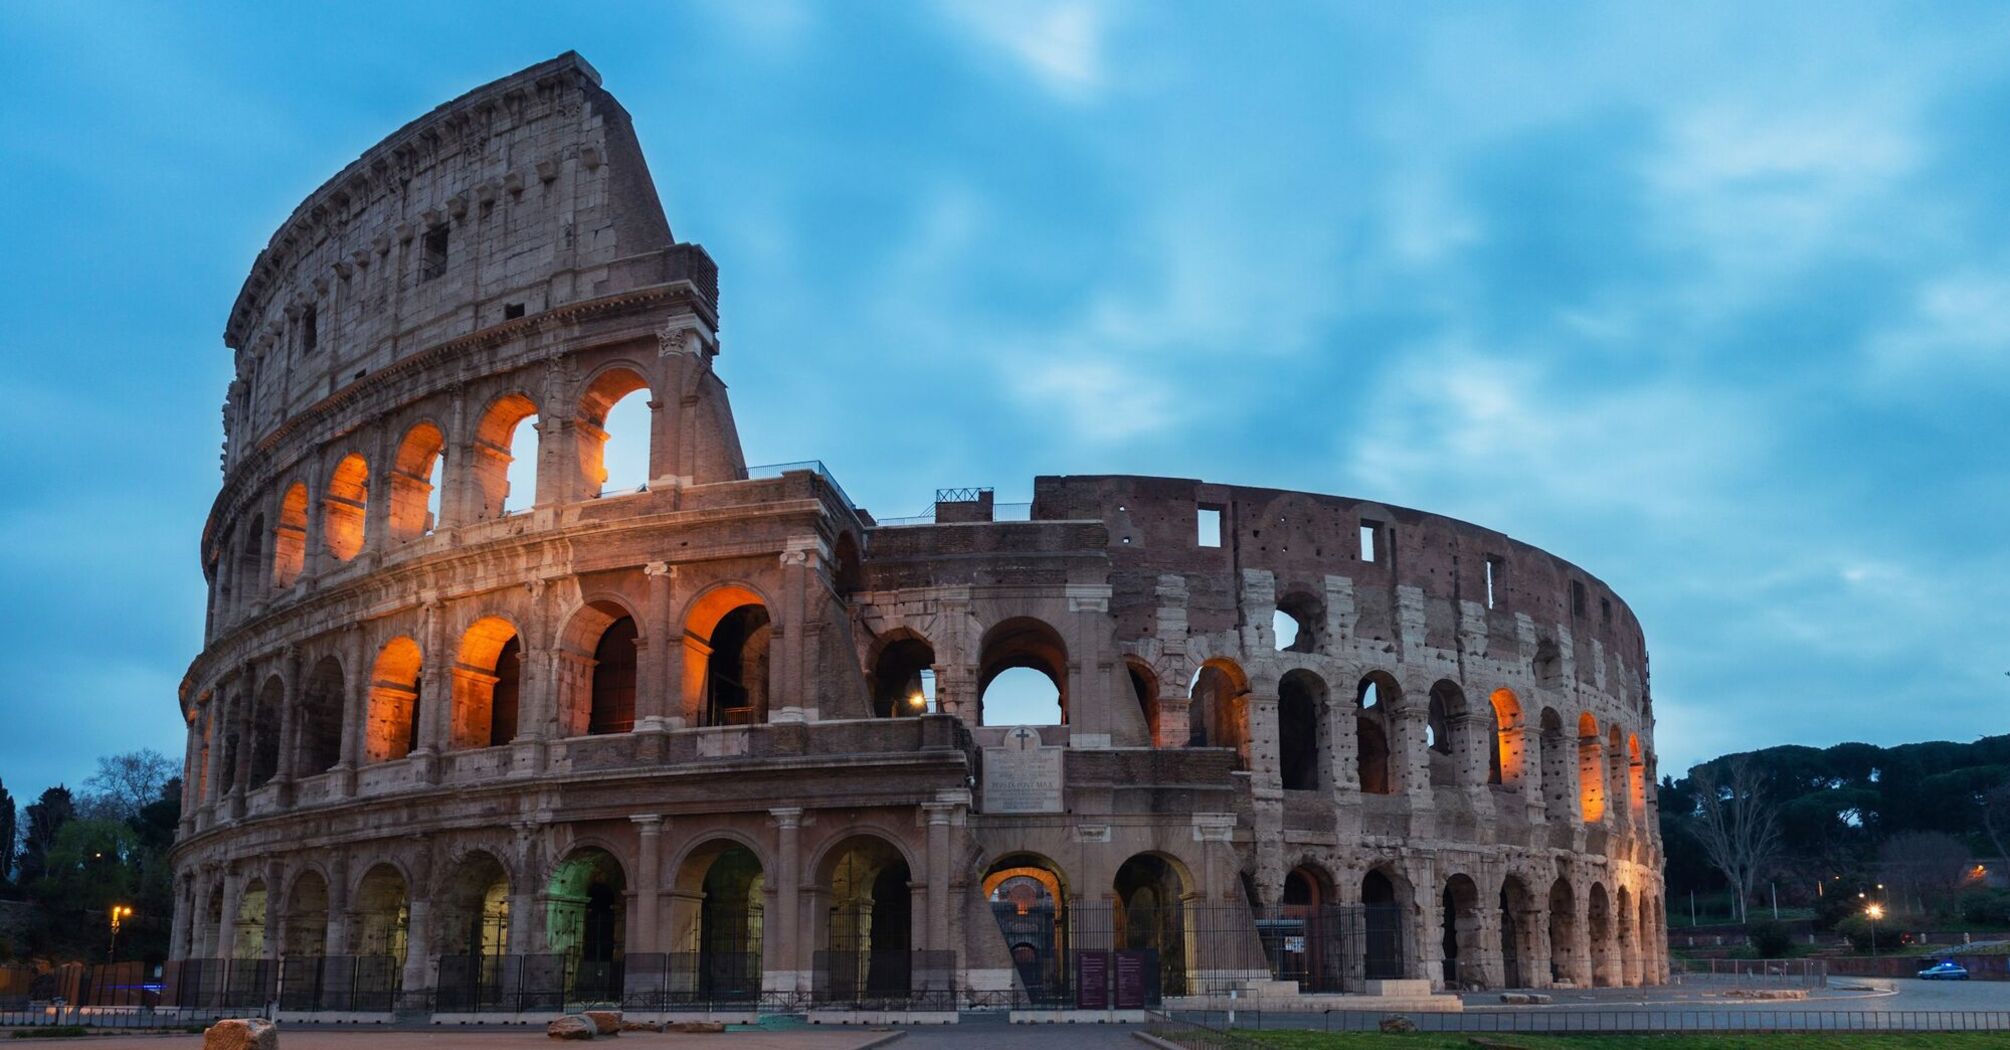 The Colosseum in Rome illuminated at dusk with a cloudy blue sky in the background